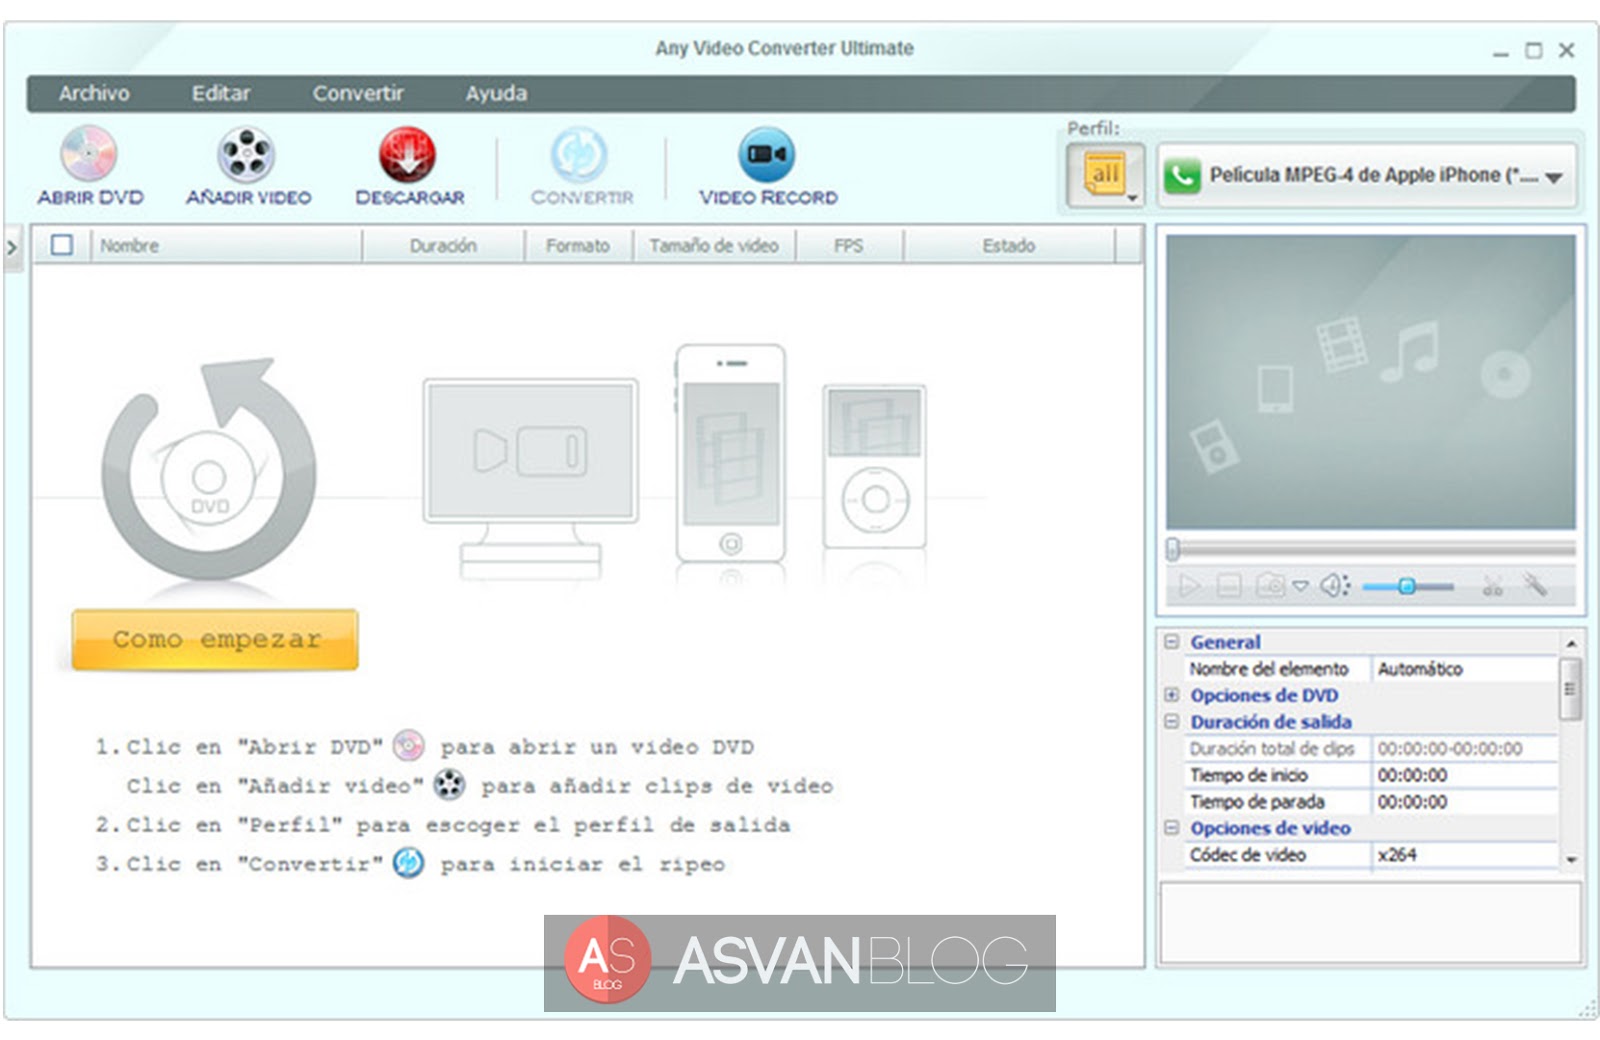 Any Video Converter Full Version With Crack Free Download